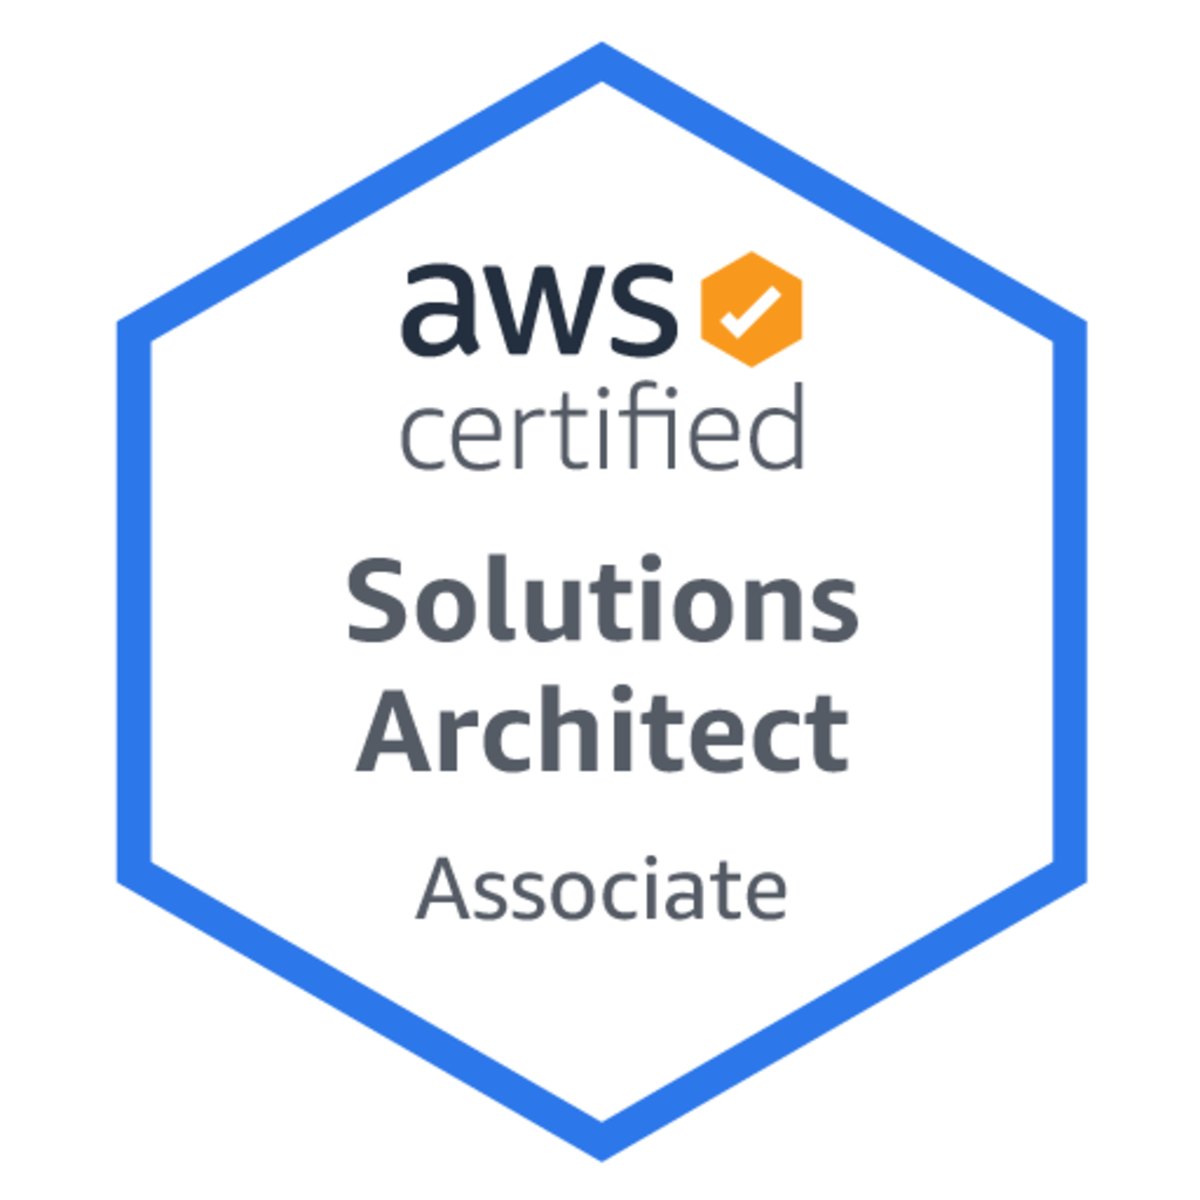 The AWS Certified Solutions Architect Exam vs Practice Tests: Which Is Easier?